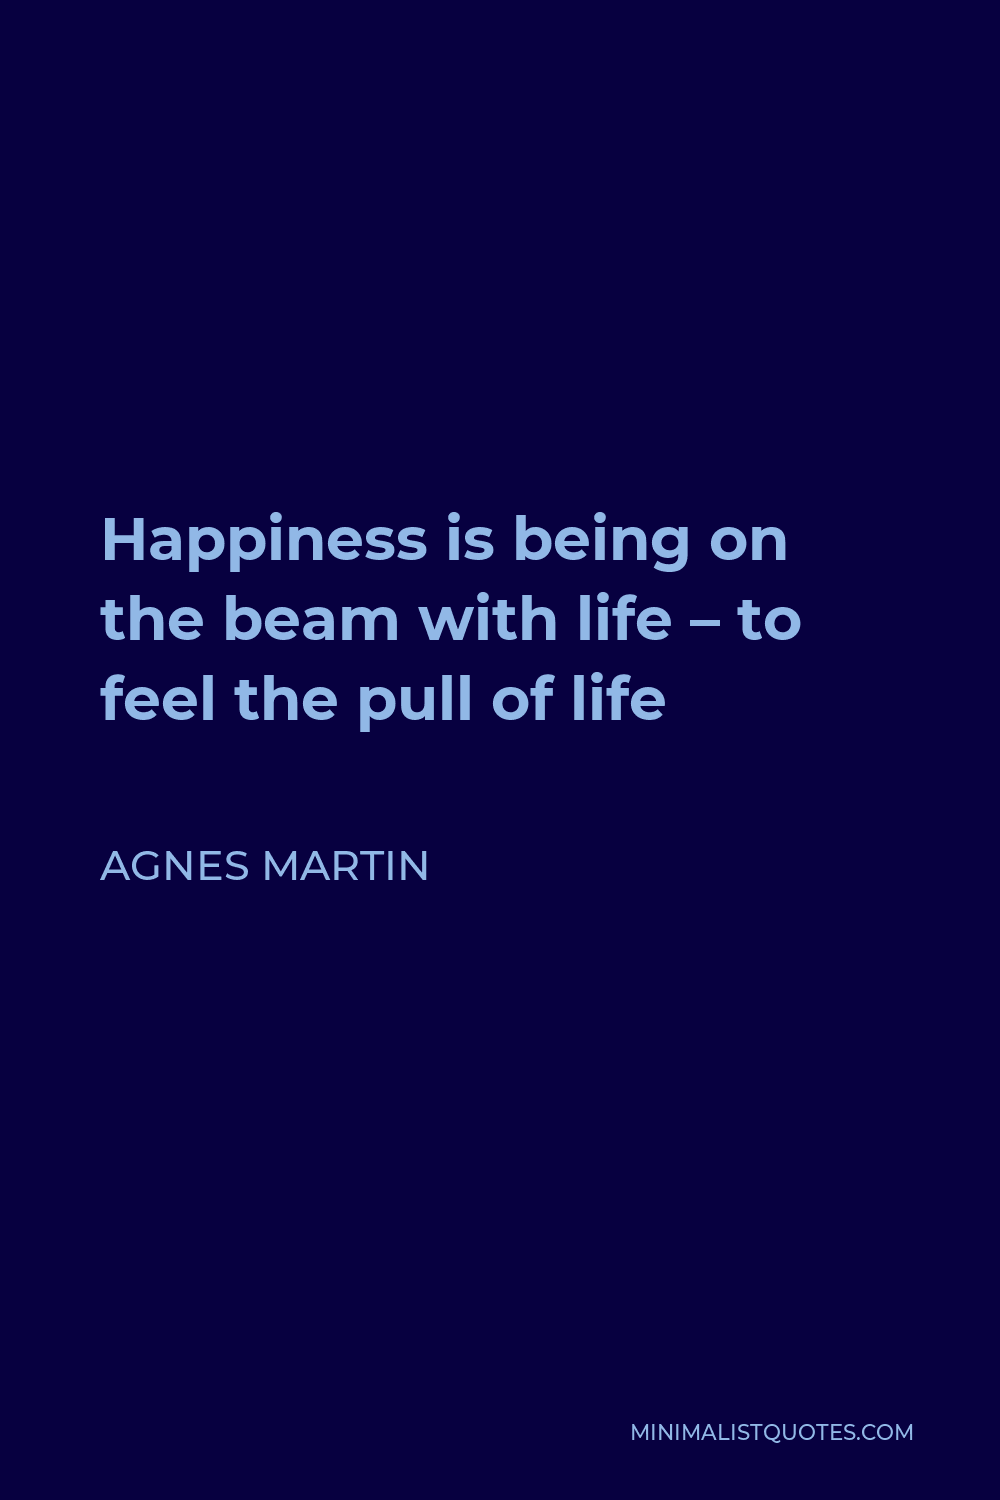 Agnes Martin Quote - Happiness is being on the beam with life – to feel the pull of life